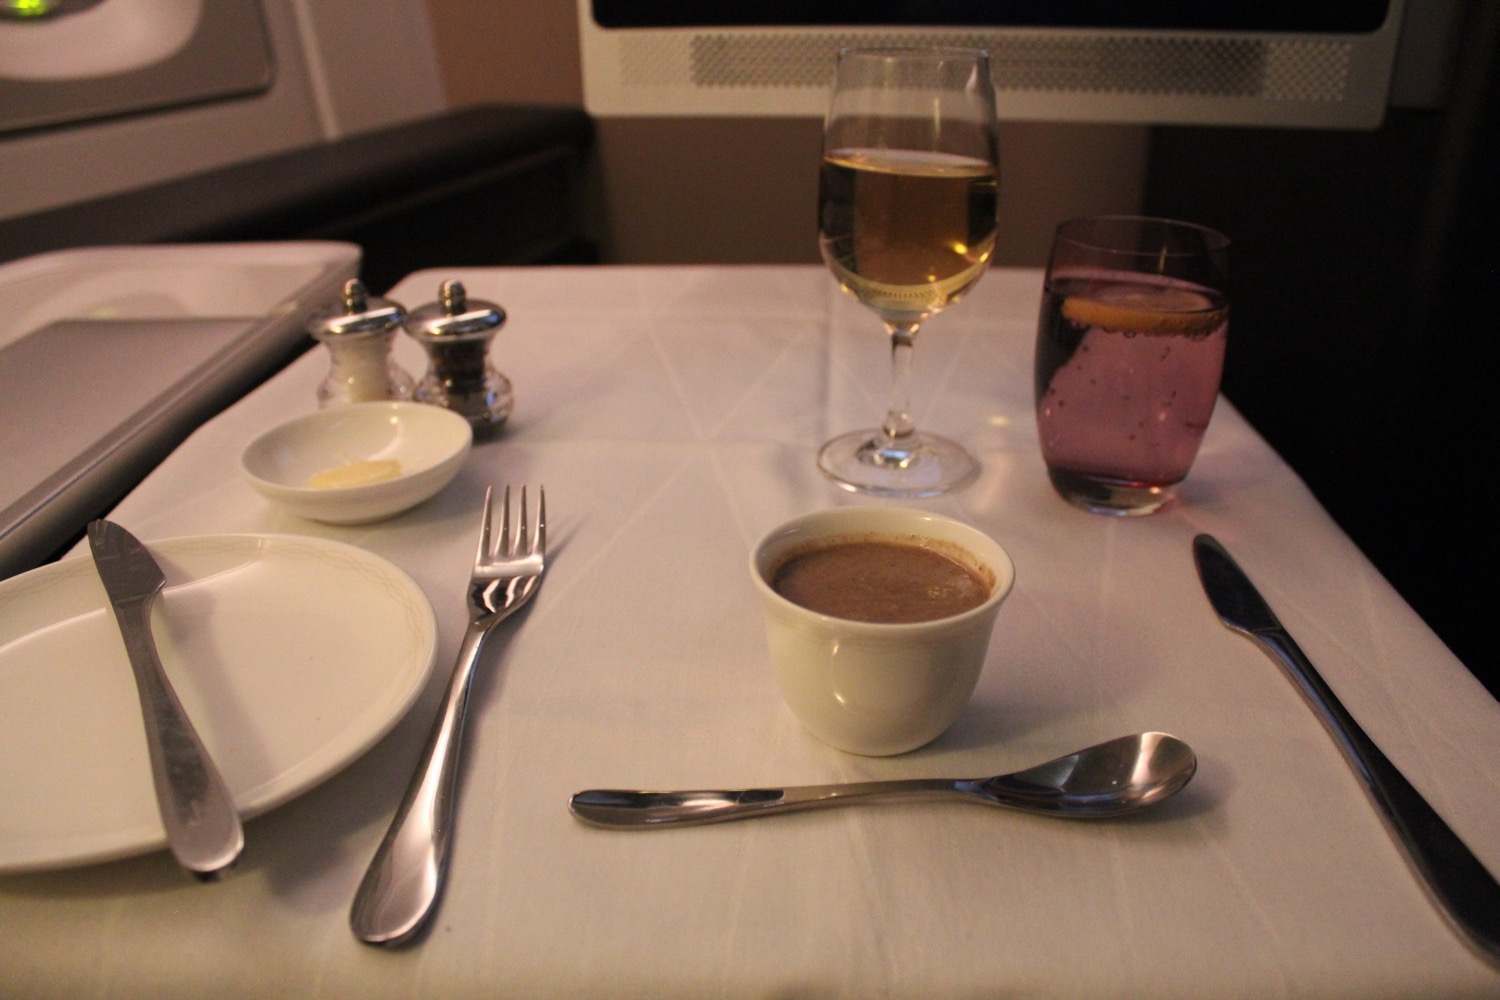 British Airways A380 First Class Review - 21